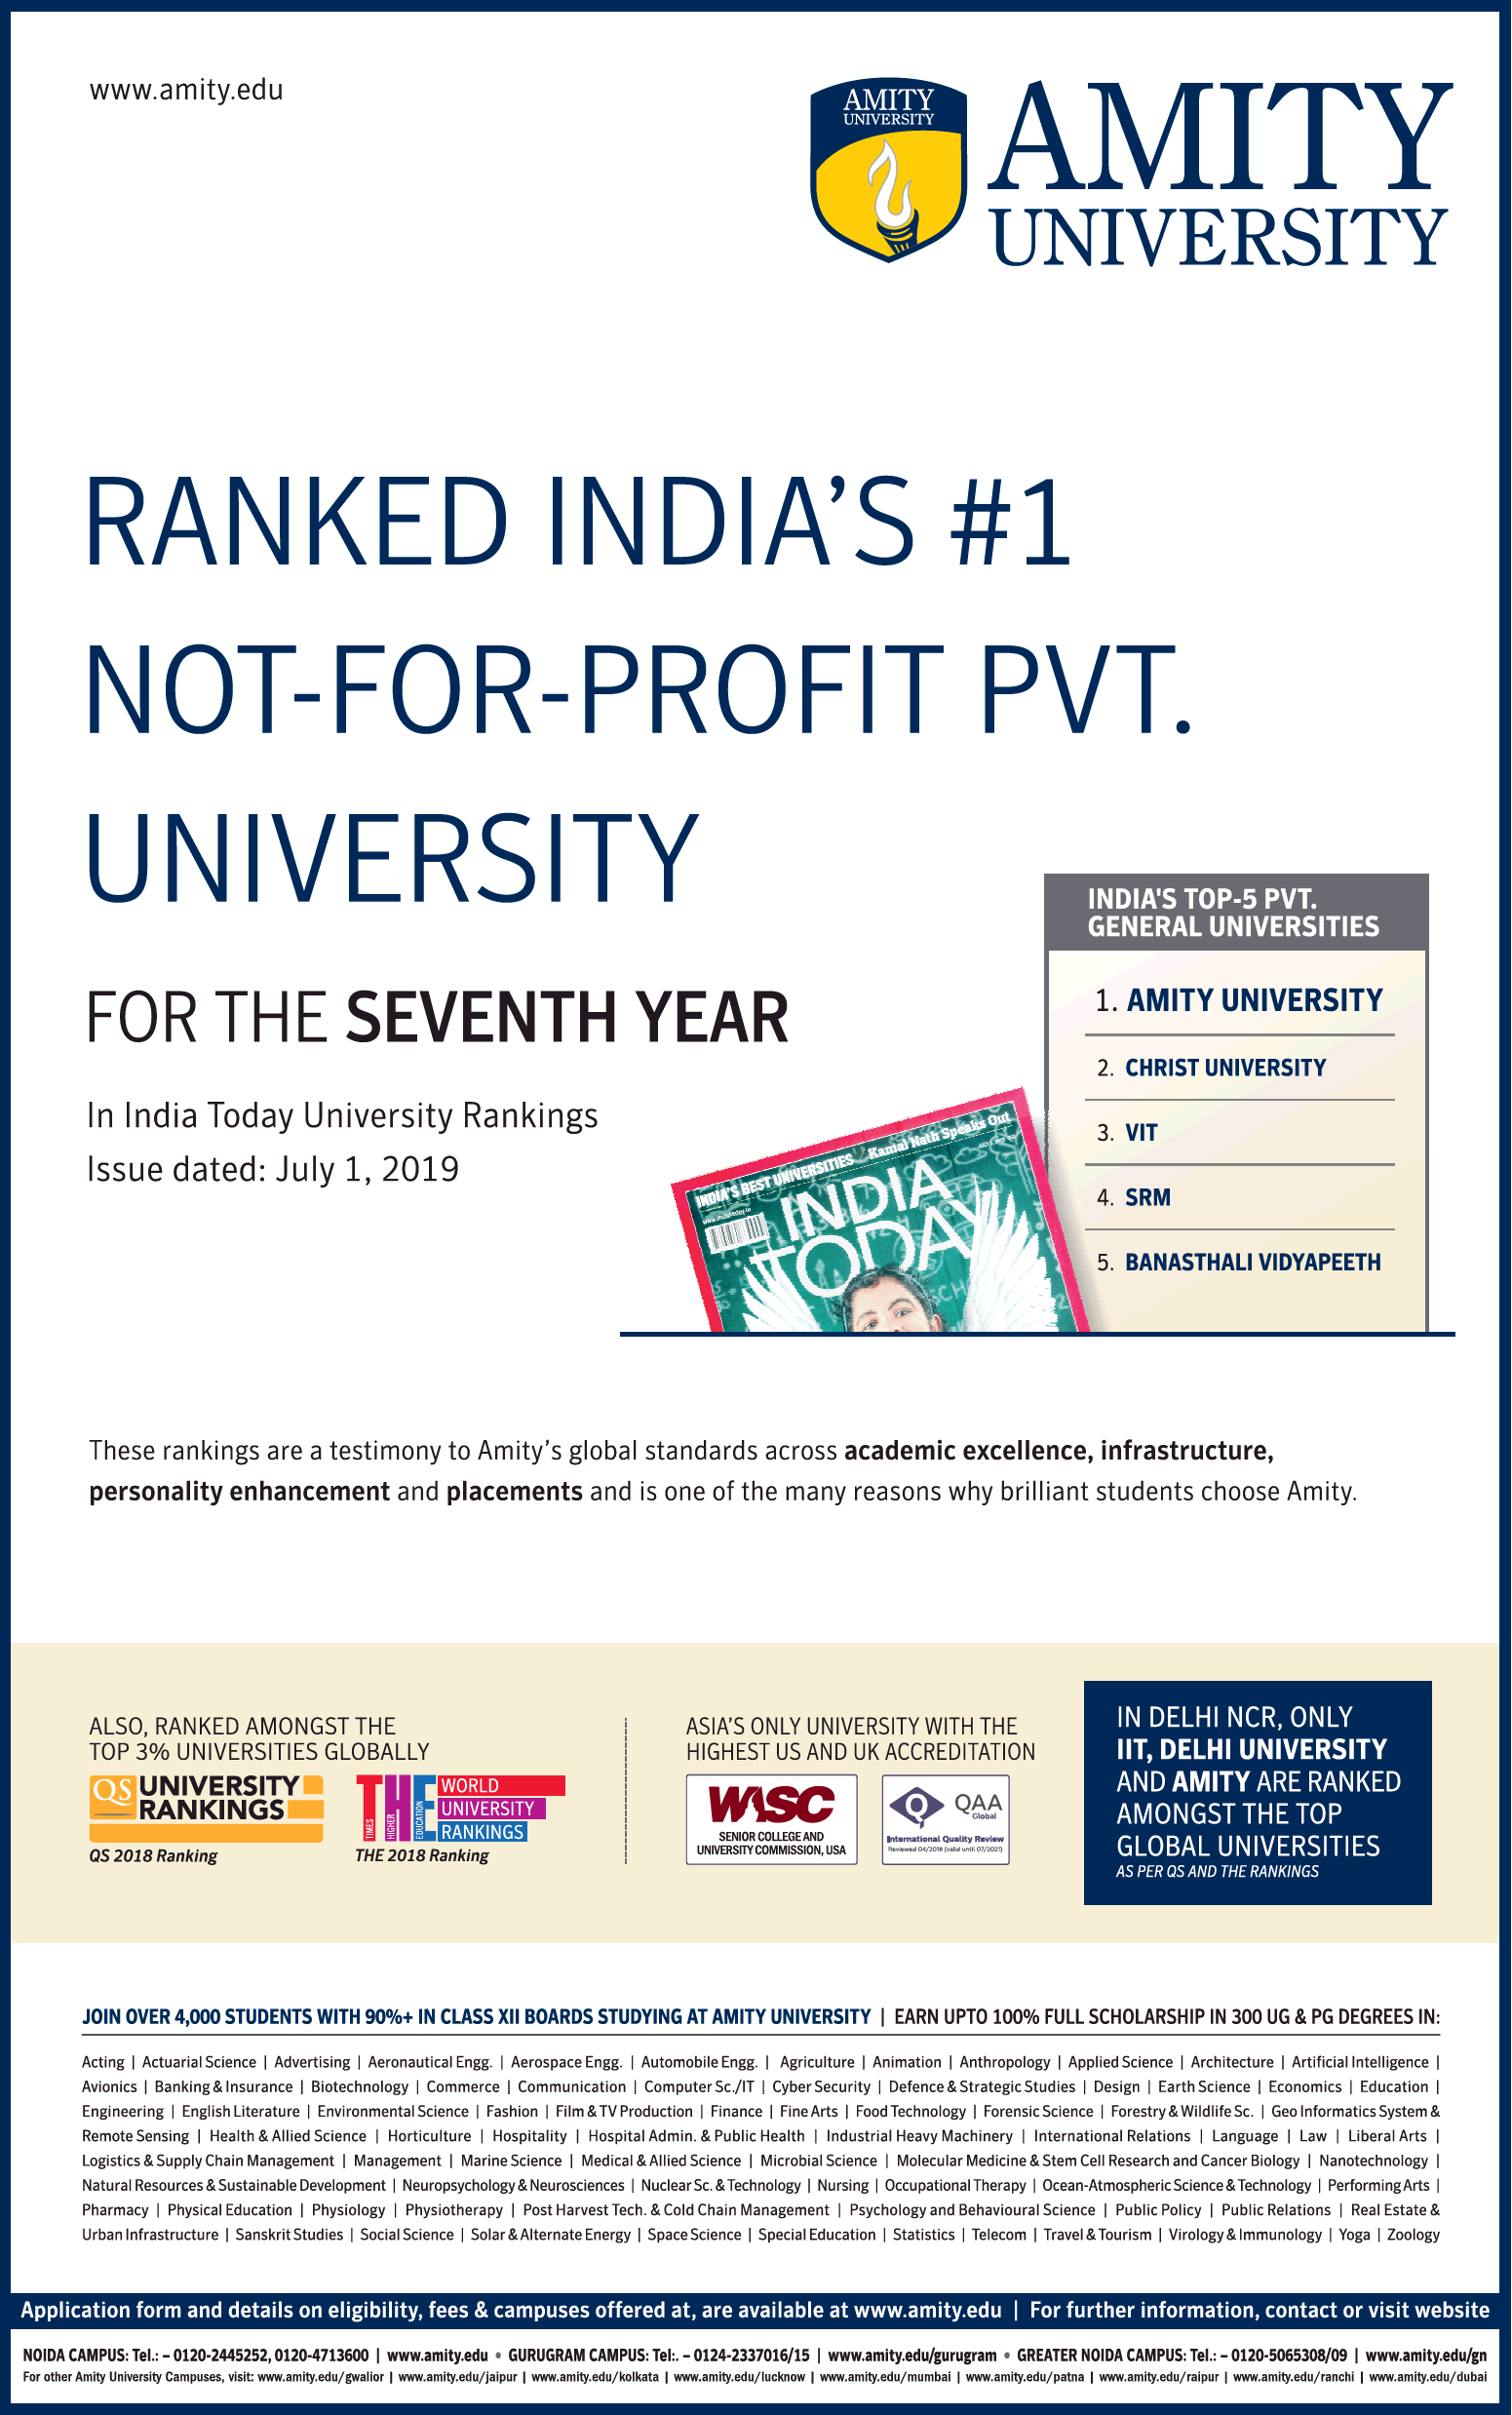 amity-university-ranked-indias-1-not-for-profit-pvt-university-ad-times-of-india-delhi-27-06-2019.png